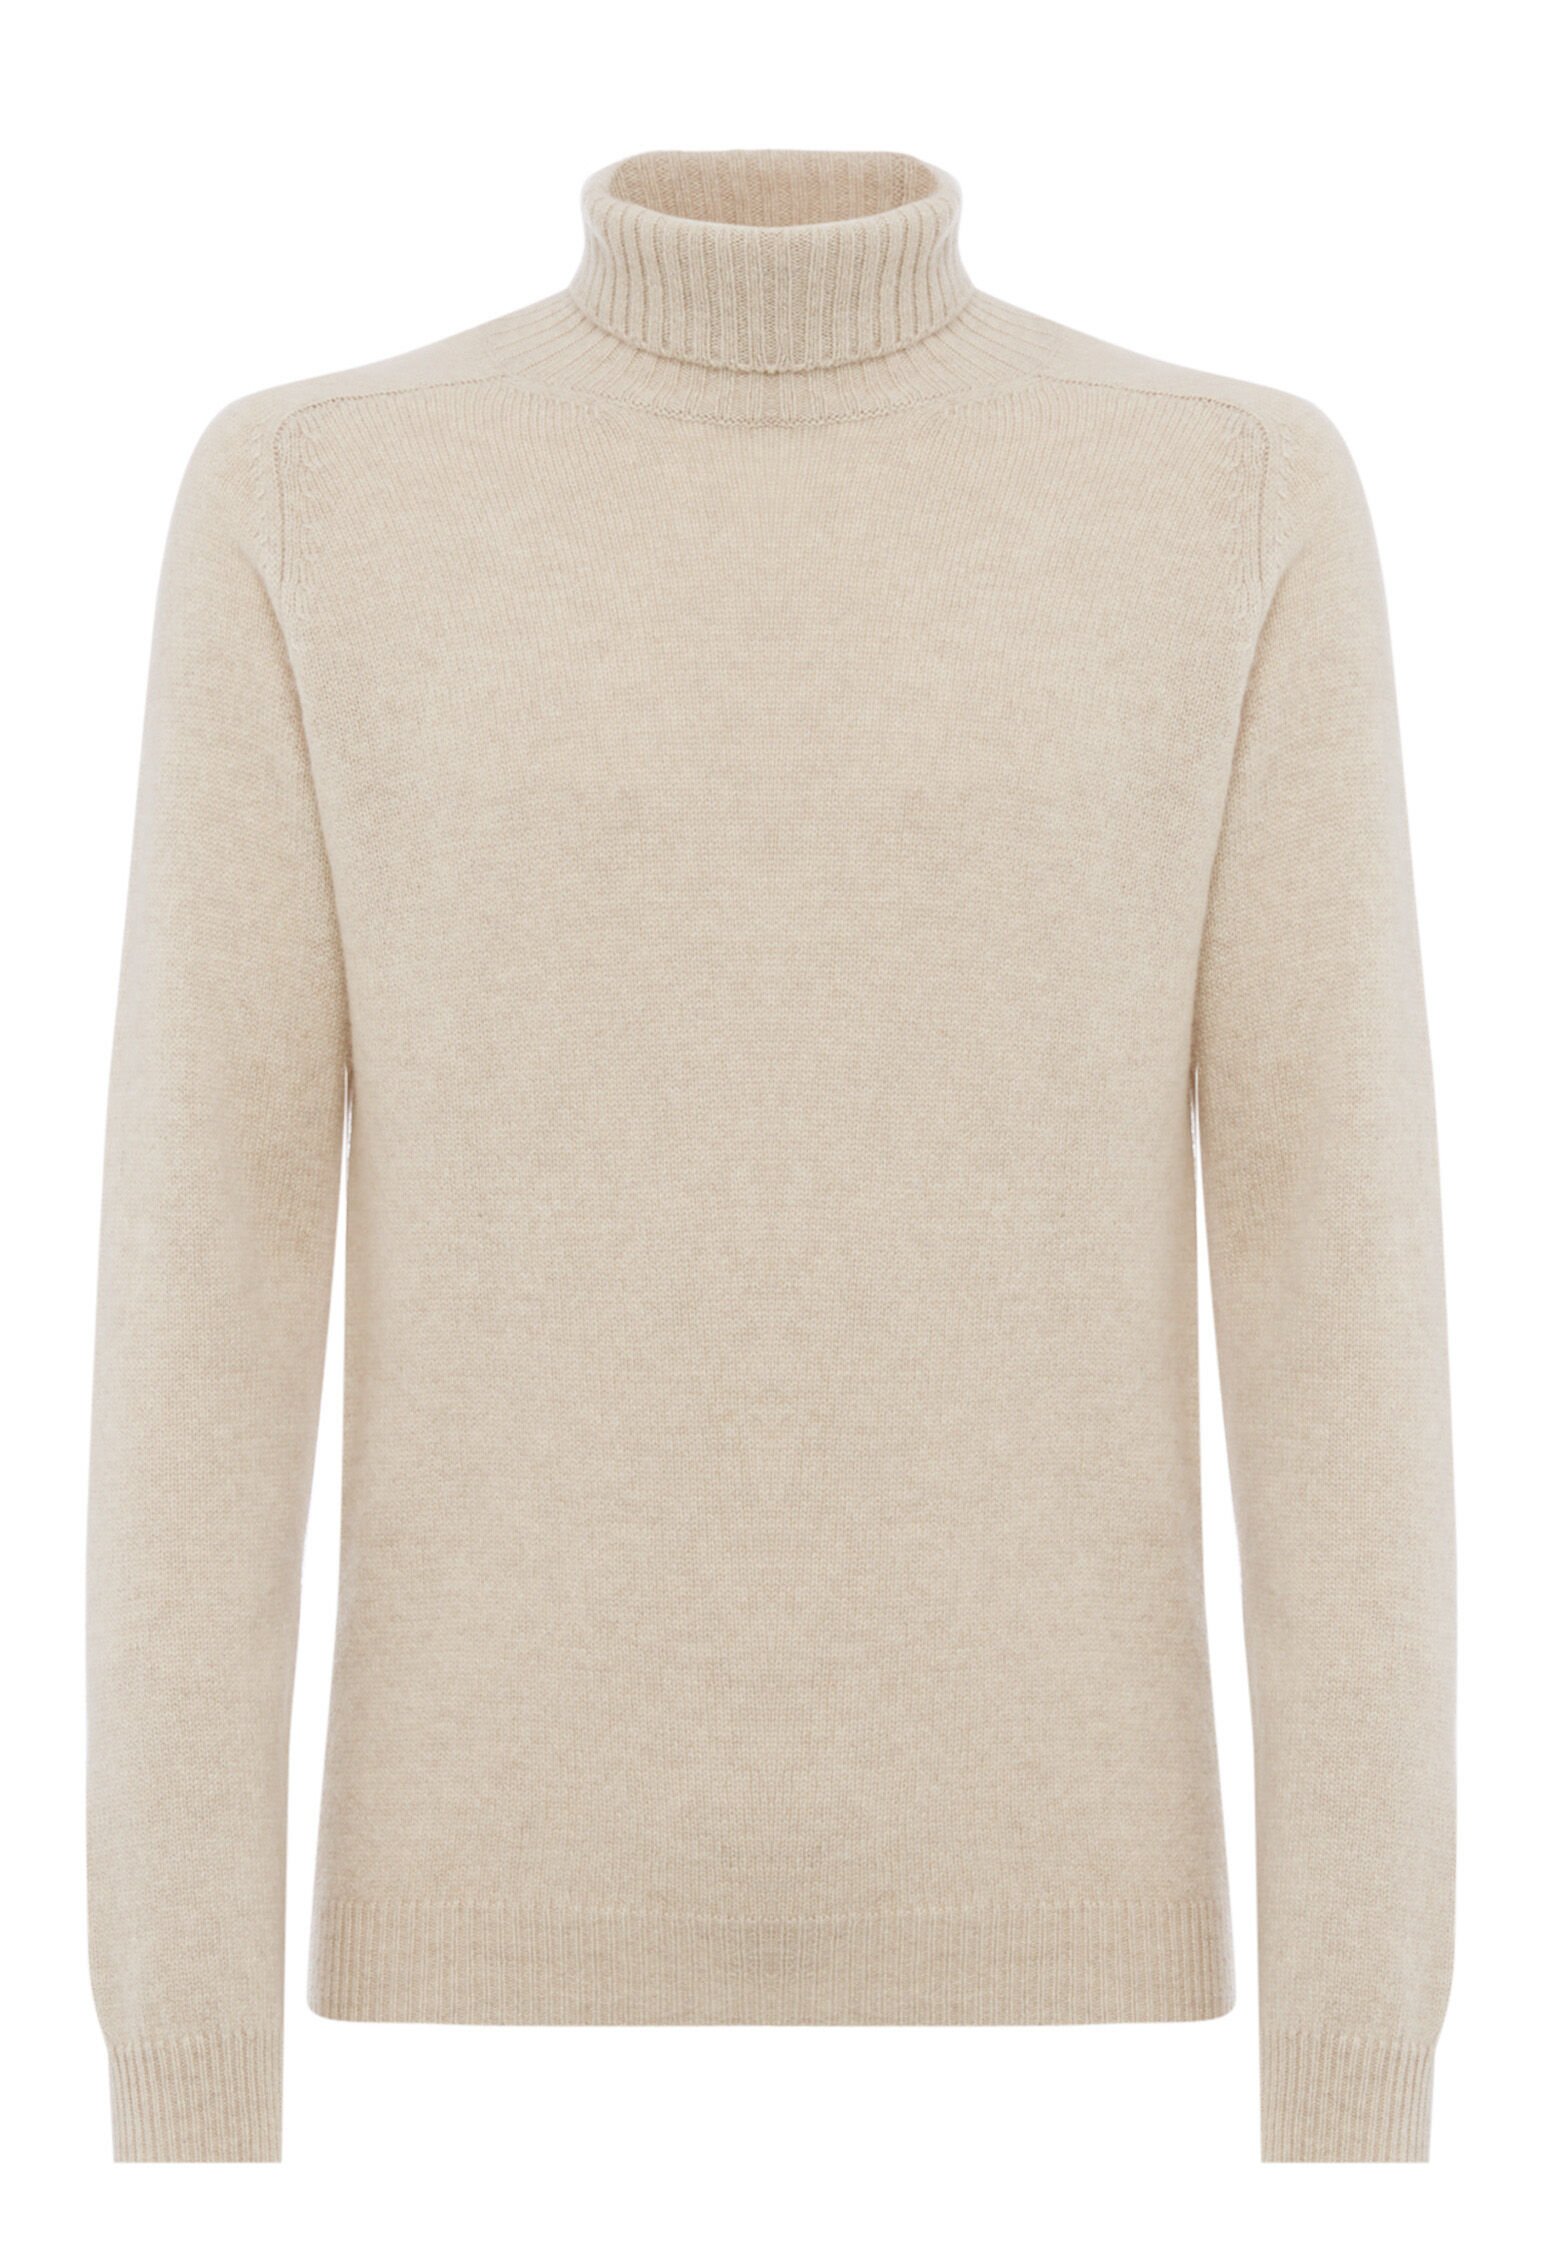 Thick Knit Premium Cashmere & Wool Roll Neck Jumper